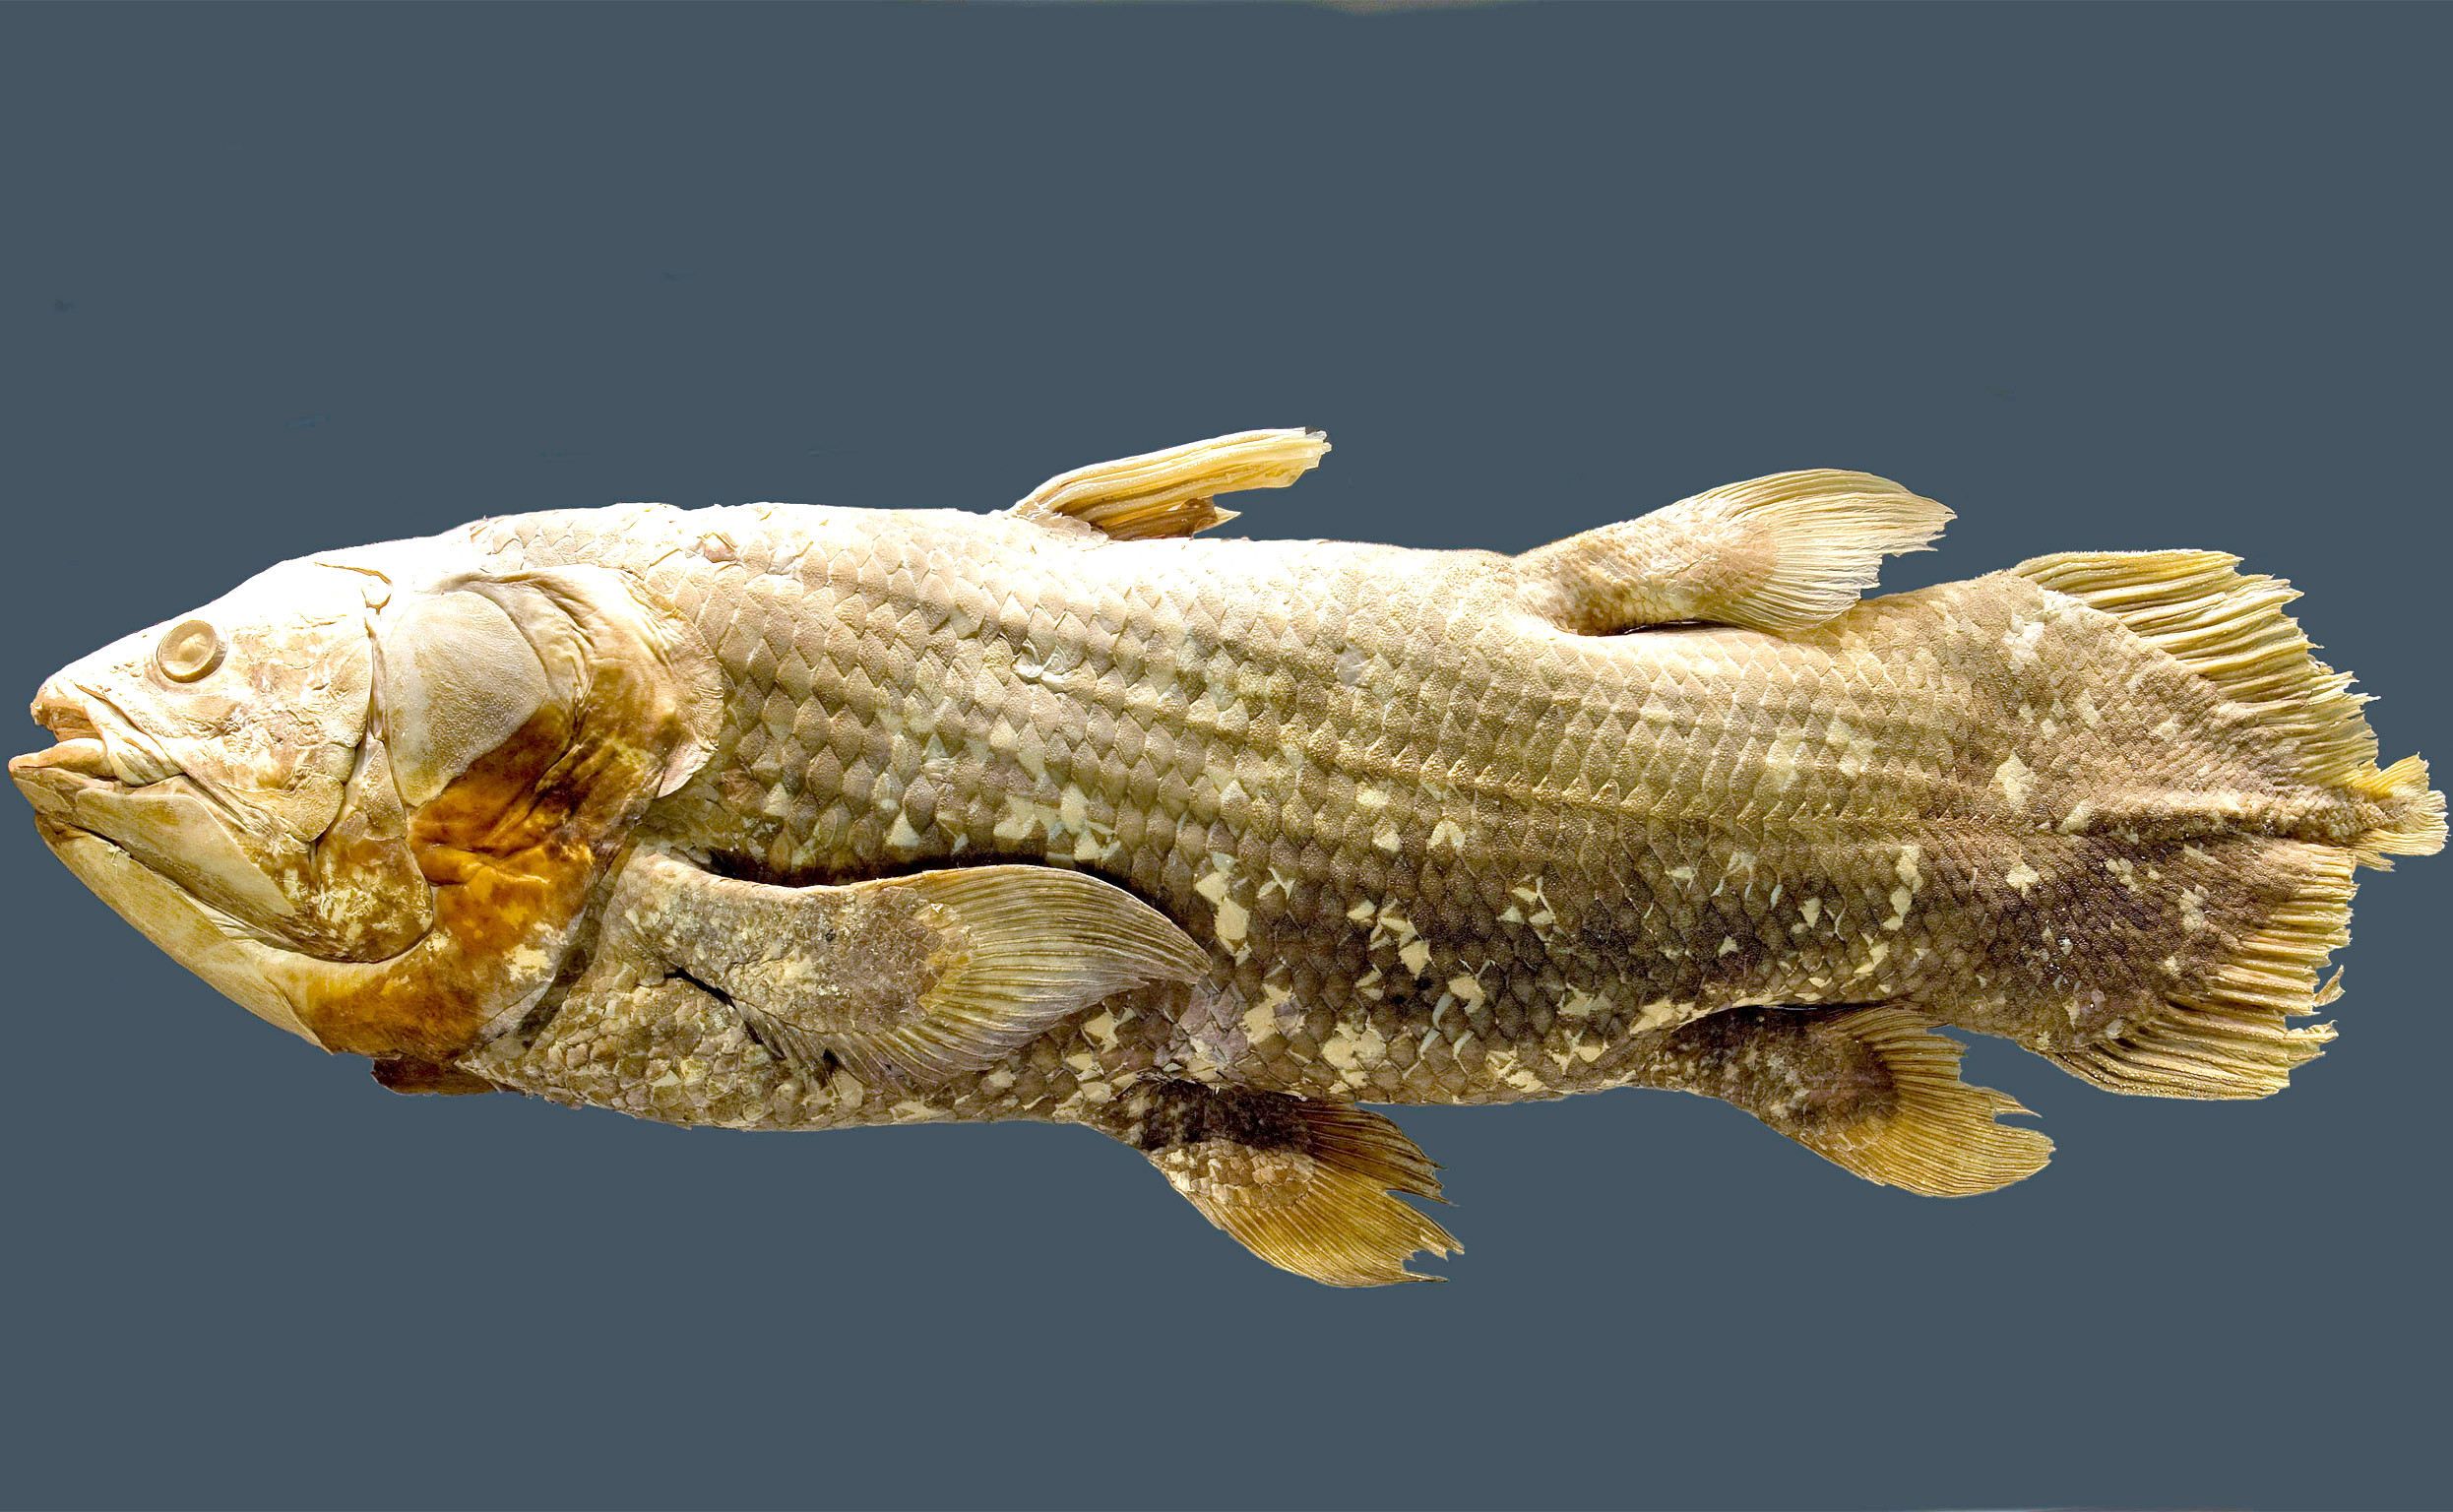 The coelacanth fish lives in deep-sea caves off the coast of Africa